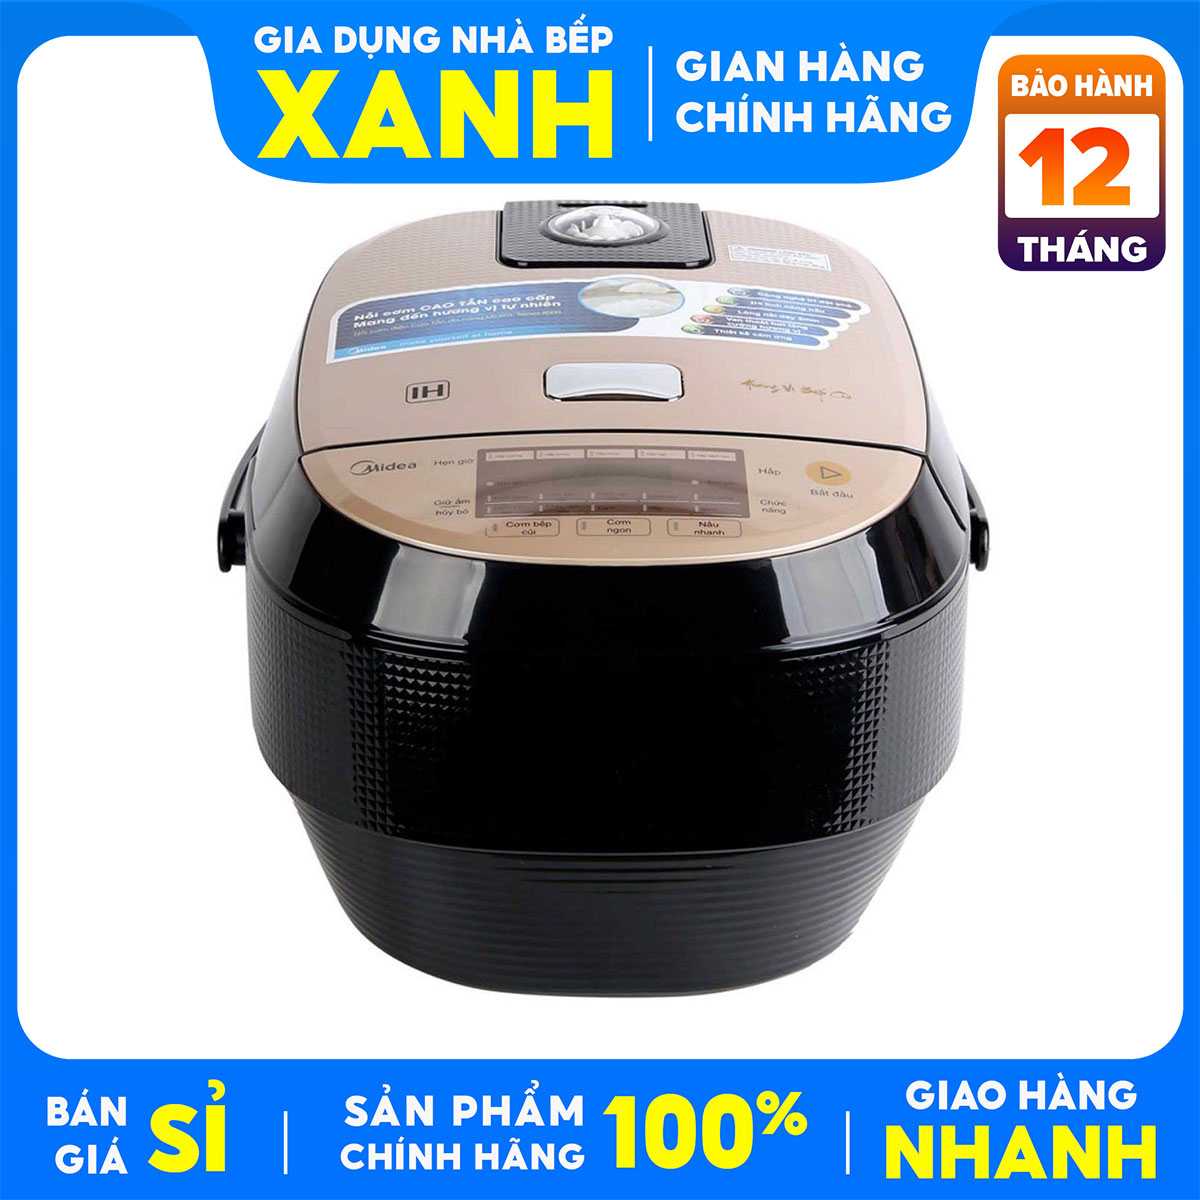 Electric rice cooker high frequency Midea 1.5 liter mb-hs4007-mới 100%